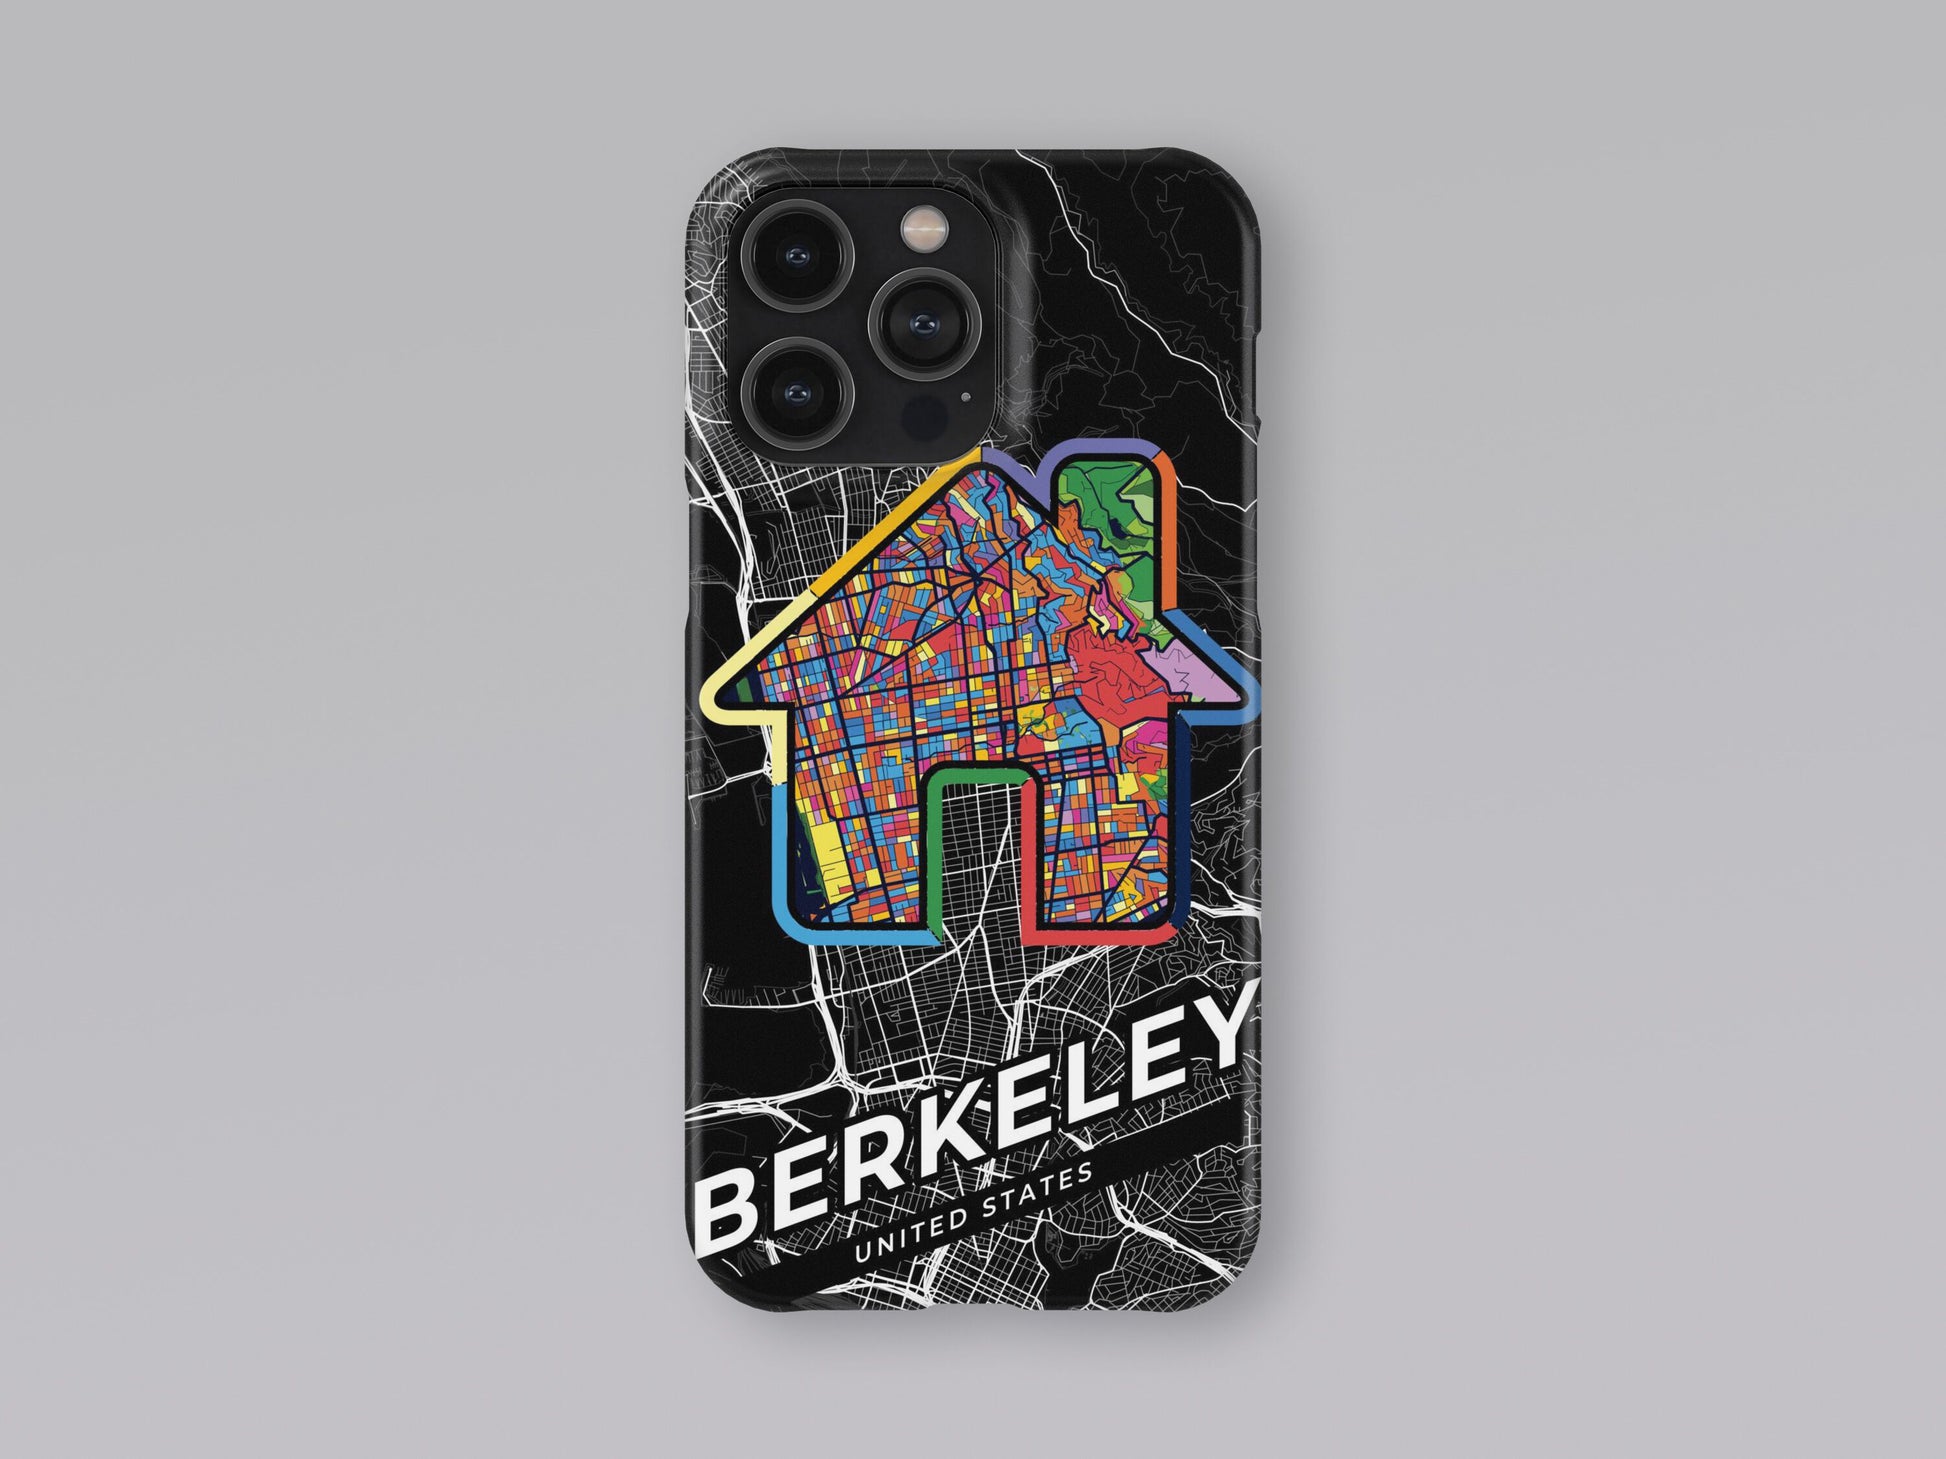 Berkeley California slim phone case with colorful icon. Birthday, wedding or housewarming gift. Couple match cases. 3